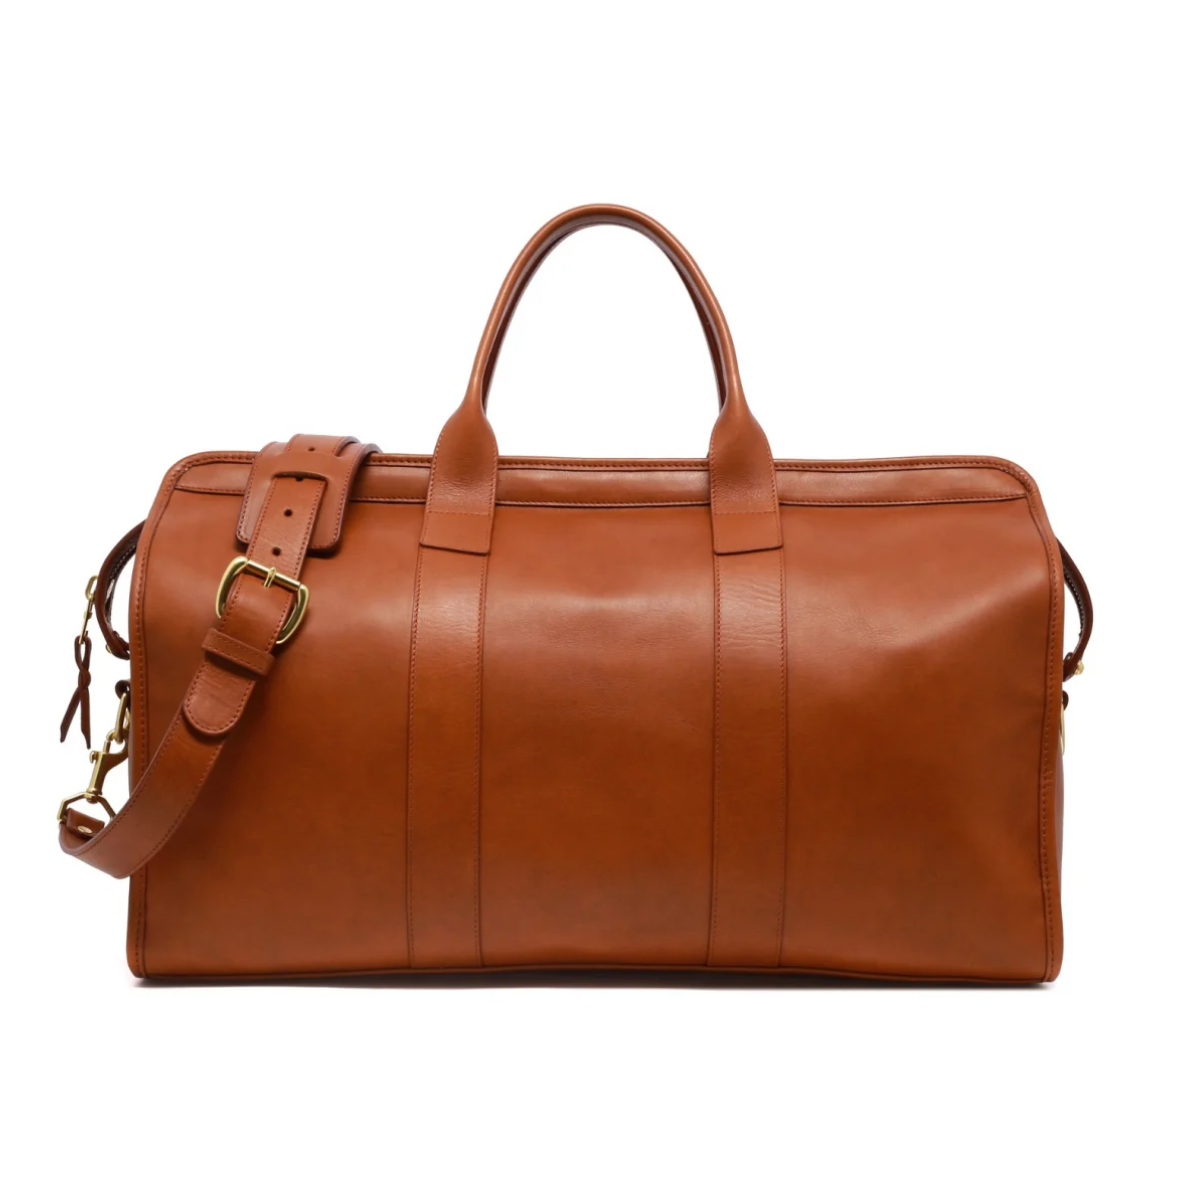 18. Timeless Elegance: Unleash Adventure with a Personalized Leather Travel Duffel Bag